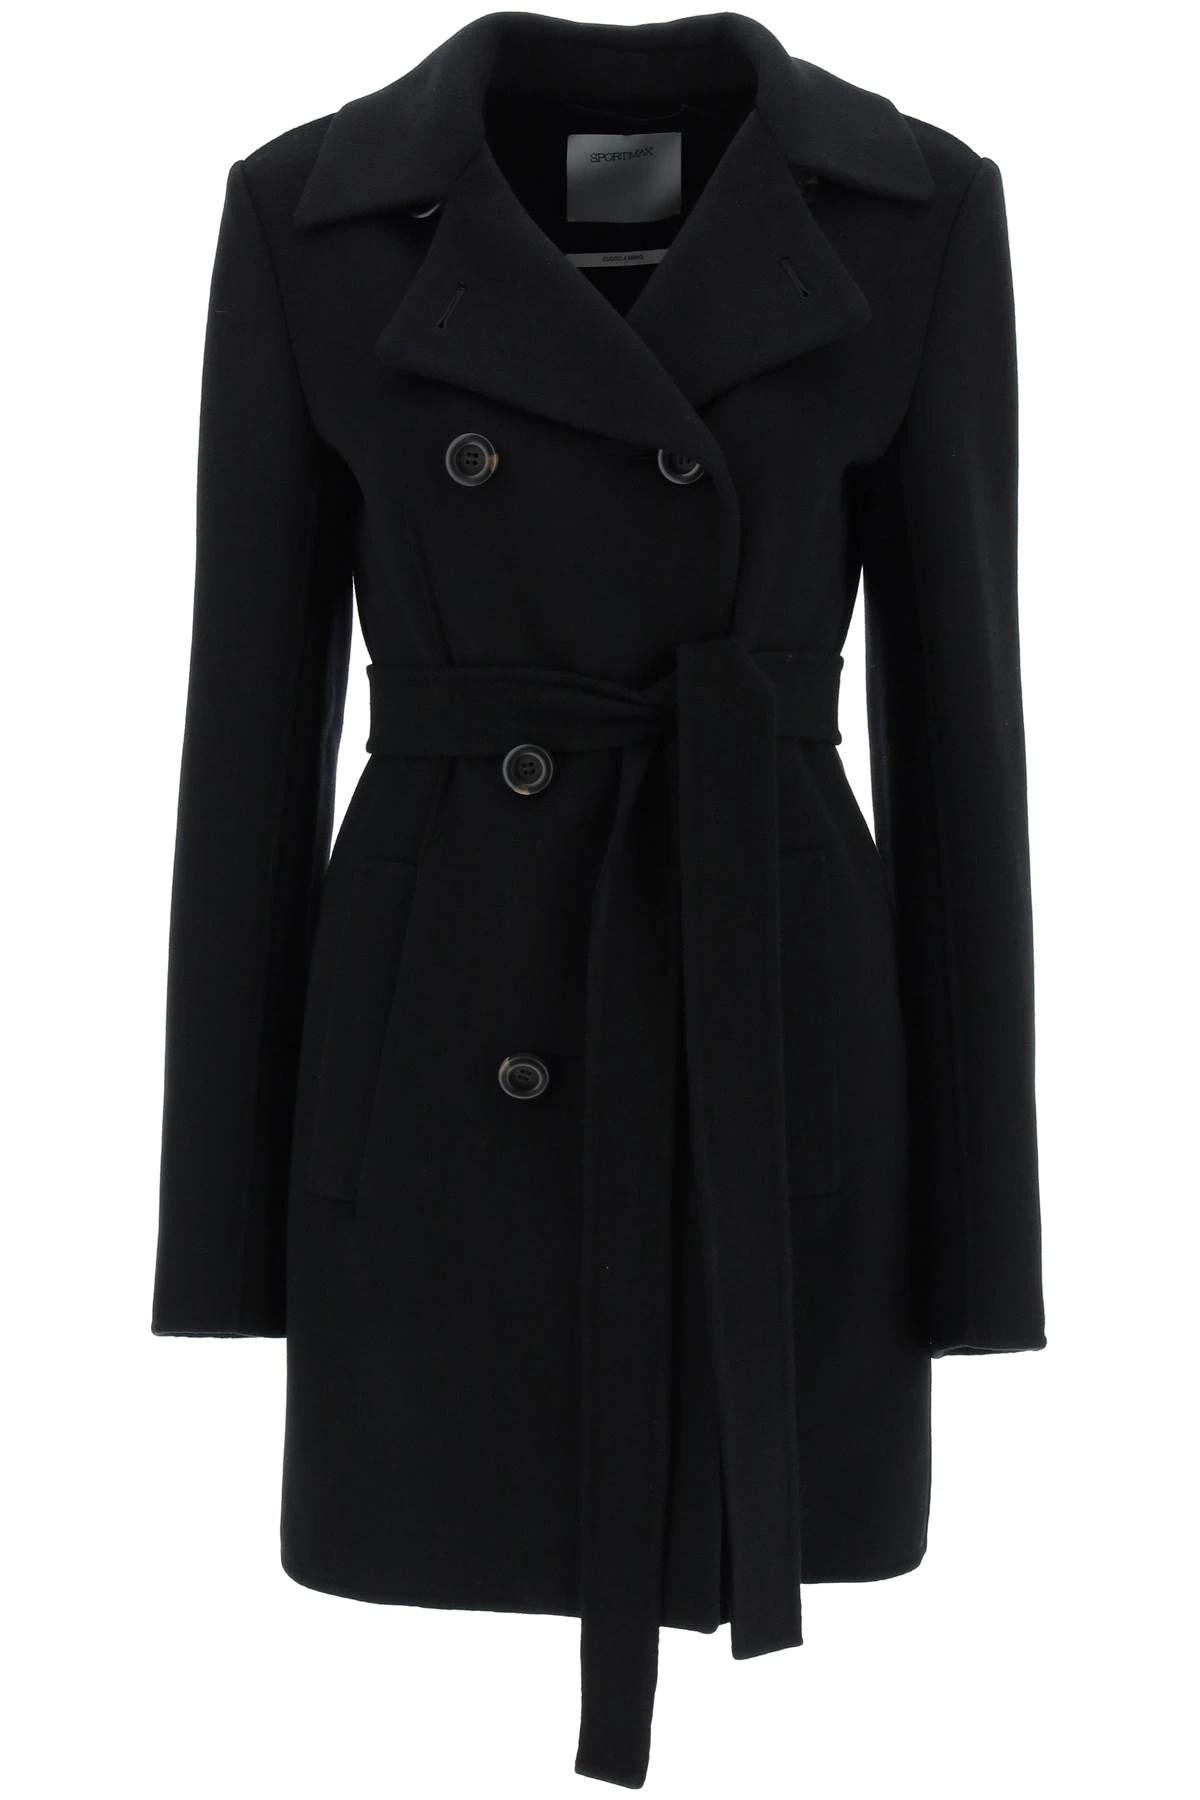 SportMax Gong Wool And Cashmere Coat